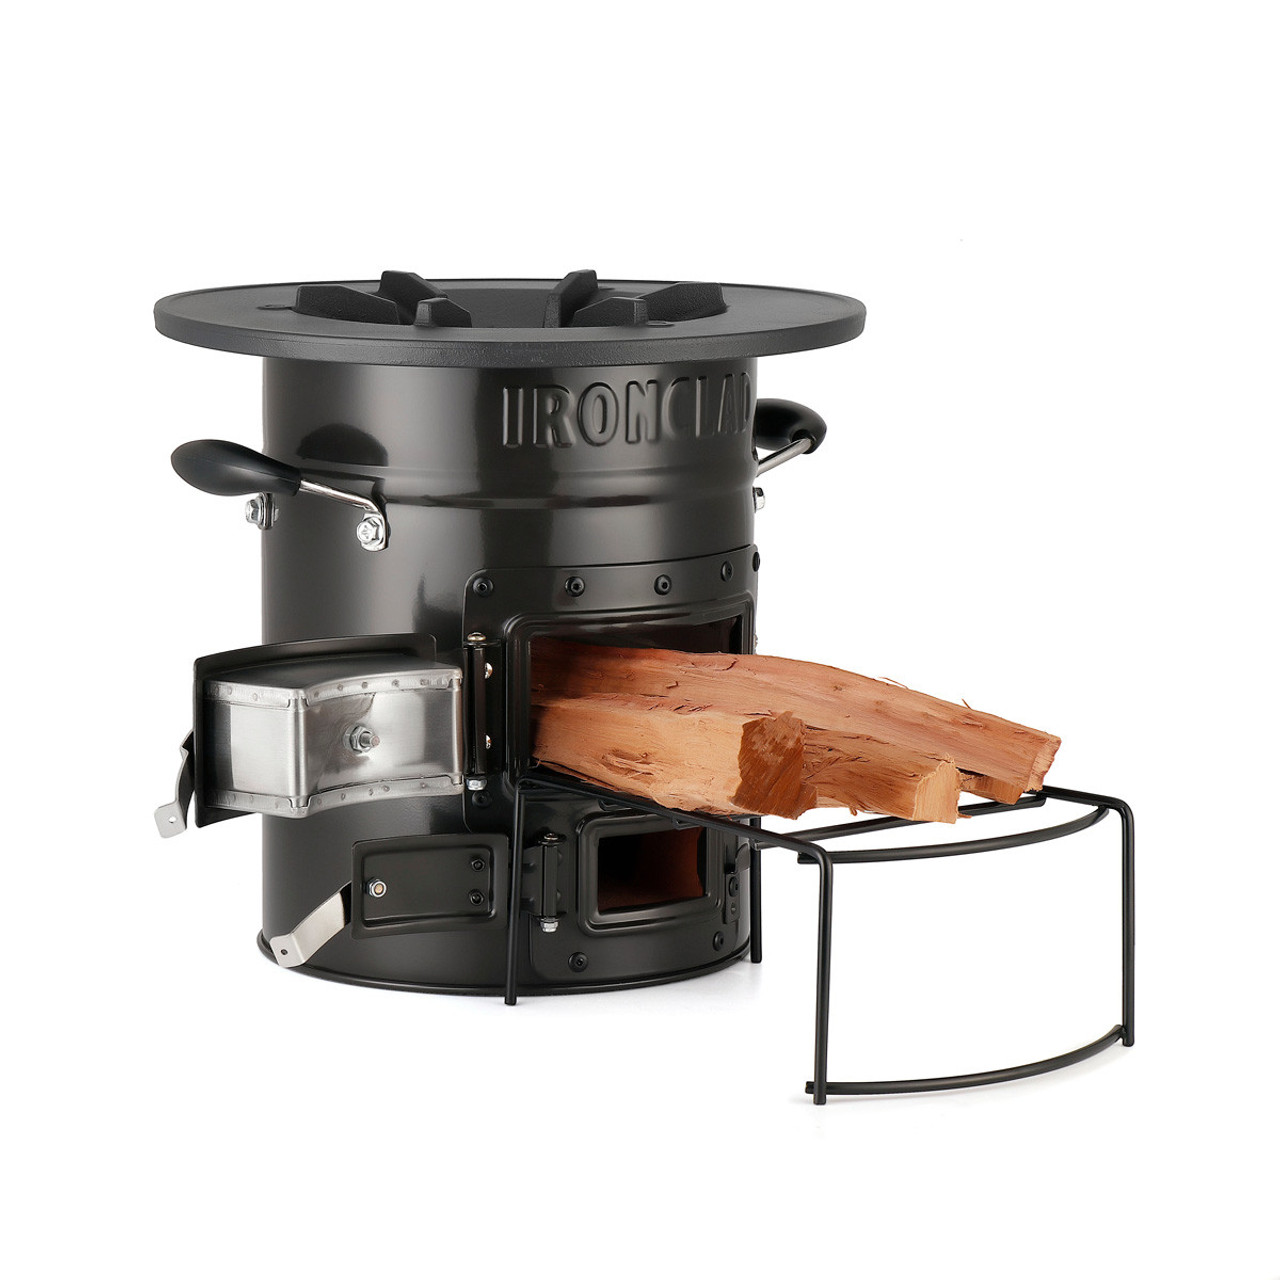 Emergency Cooking - Portable Stoves & More